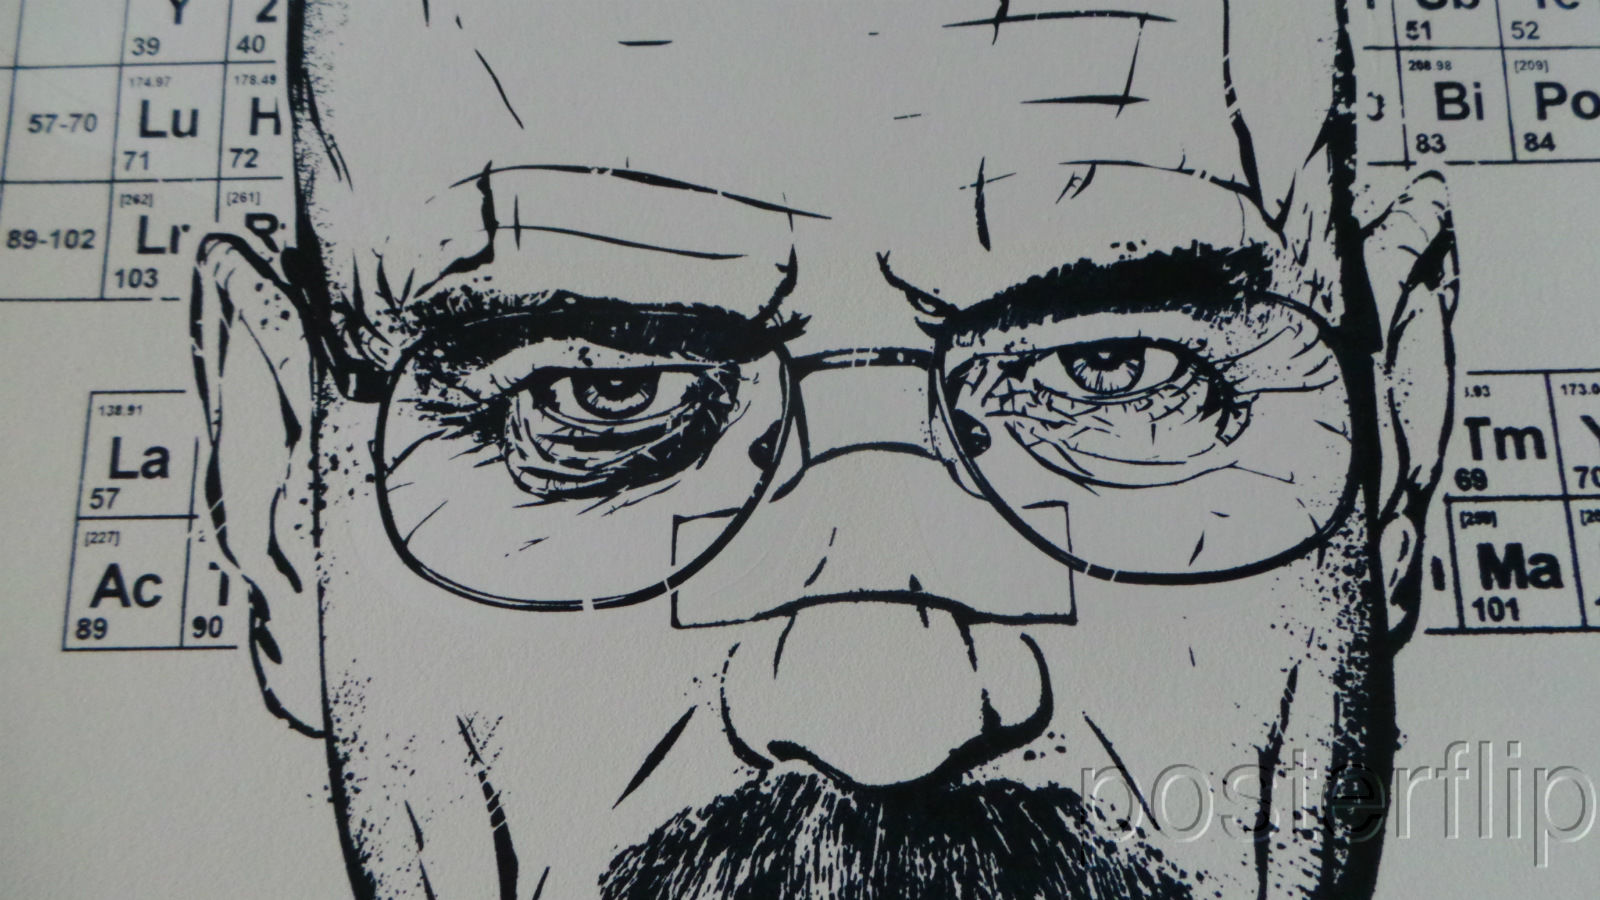 Title: Respect the Chemistry 2013  Artist: Timothy Anderson  Edition:  xx/65  Type: Screen print.  Size: 12" x 16"  Notes:  Signed and numbered by the artist.  For the hit TV series 'Breaking Bad' on AMC Channel, Walter White half Heisenberg.  Print is stored flat in very good condition. Following purchase, prints are rolled in archival paper and shipped with bubble wrap in sturdy cardboard tubes.  Check out our other listings for more hard-to-find and out-of-print posters.